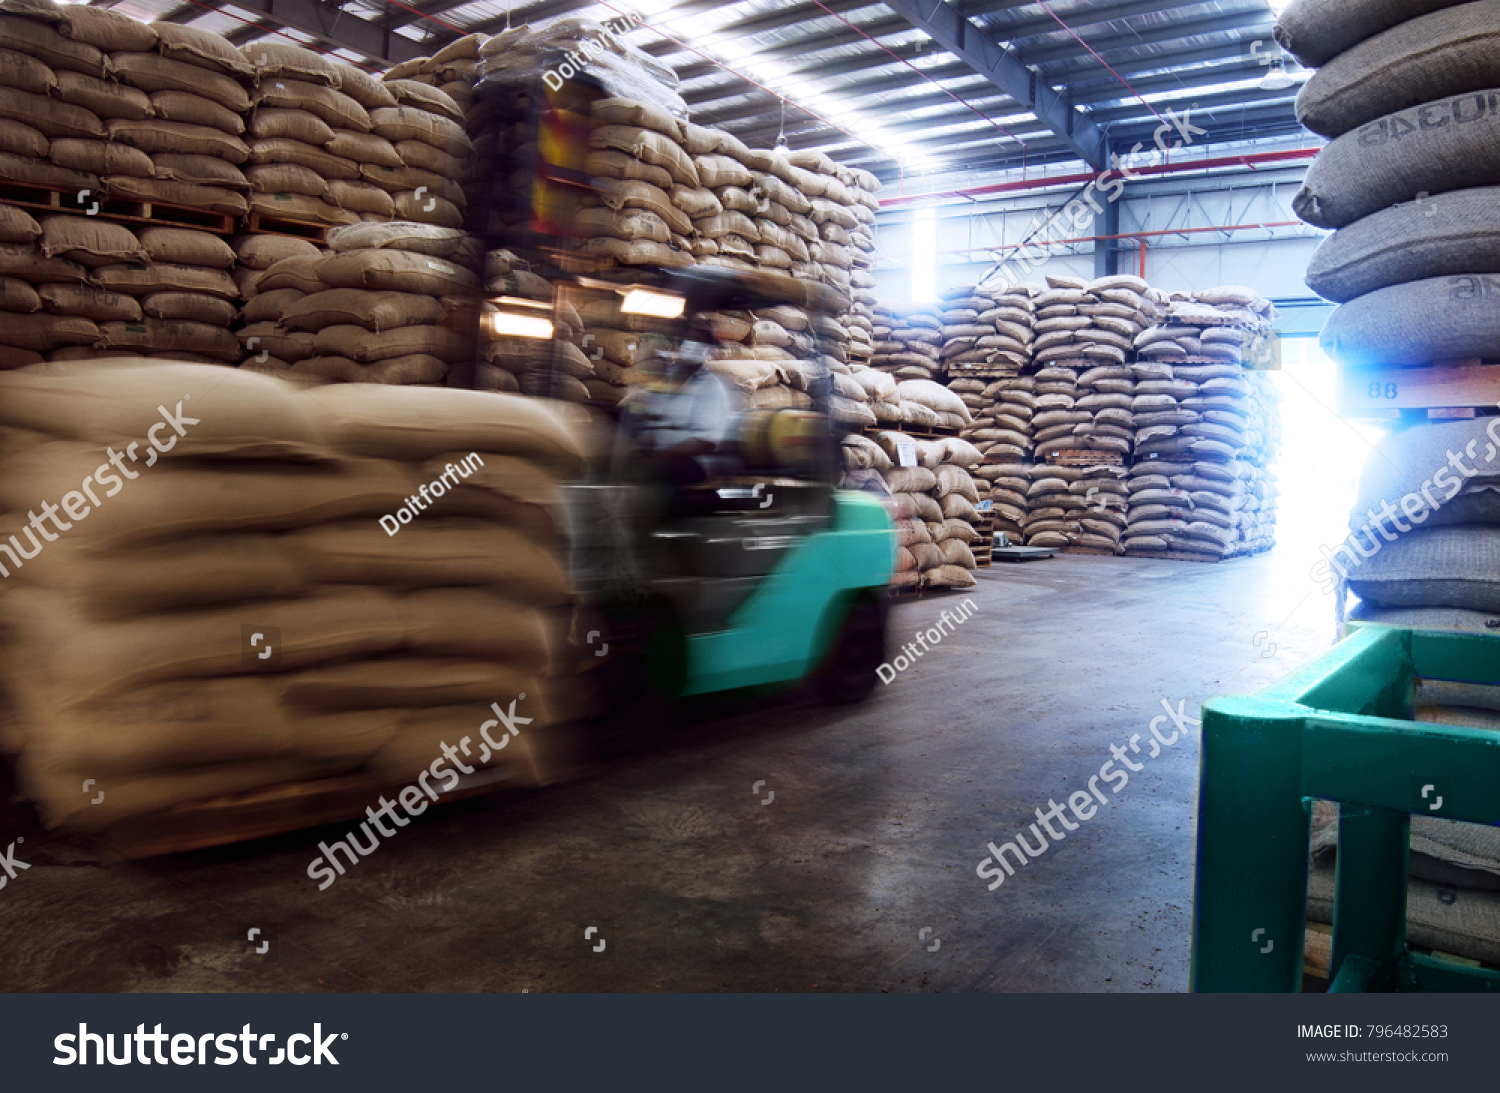 Forklift Truck Loads Pallets Finished Goods Stock Photo Edit Now 796482583